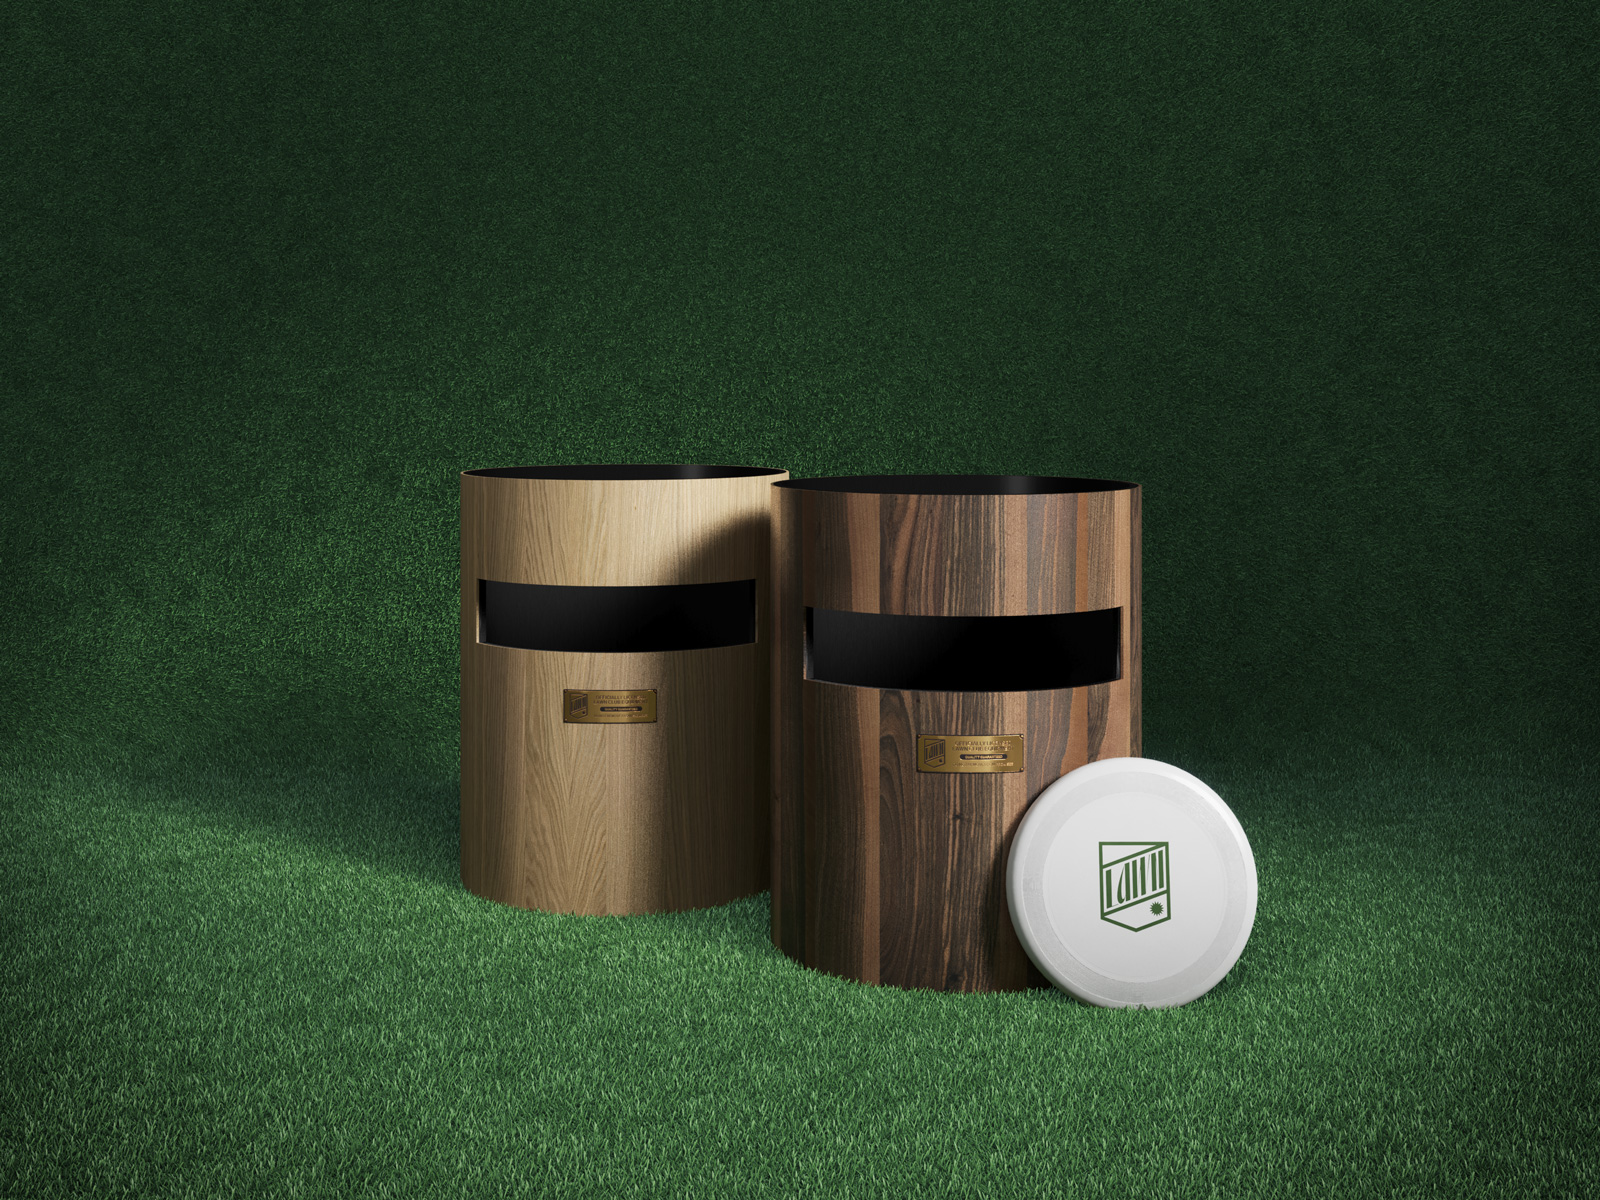 A set of gaming of equipment for the game kan jam, made of rich dark and light wood, set against a green turf background.